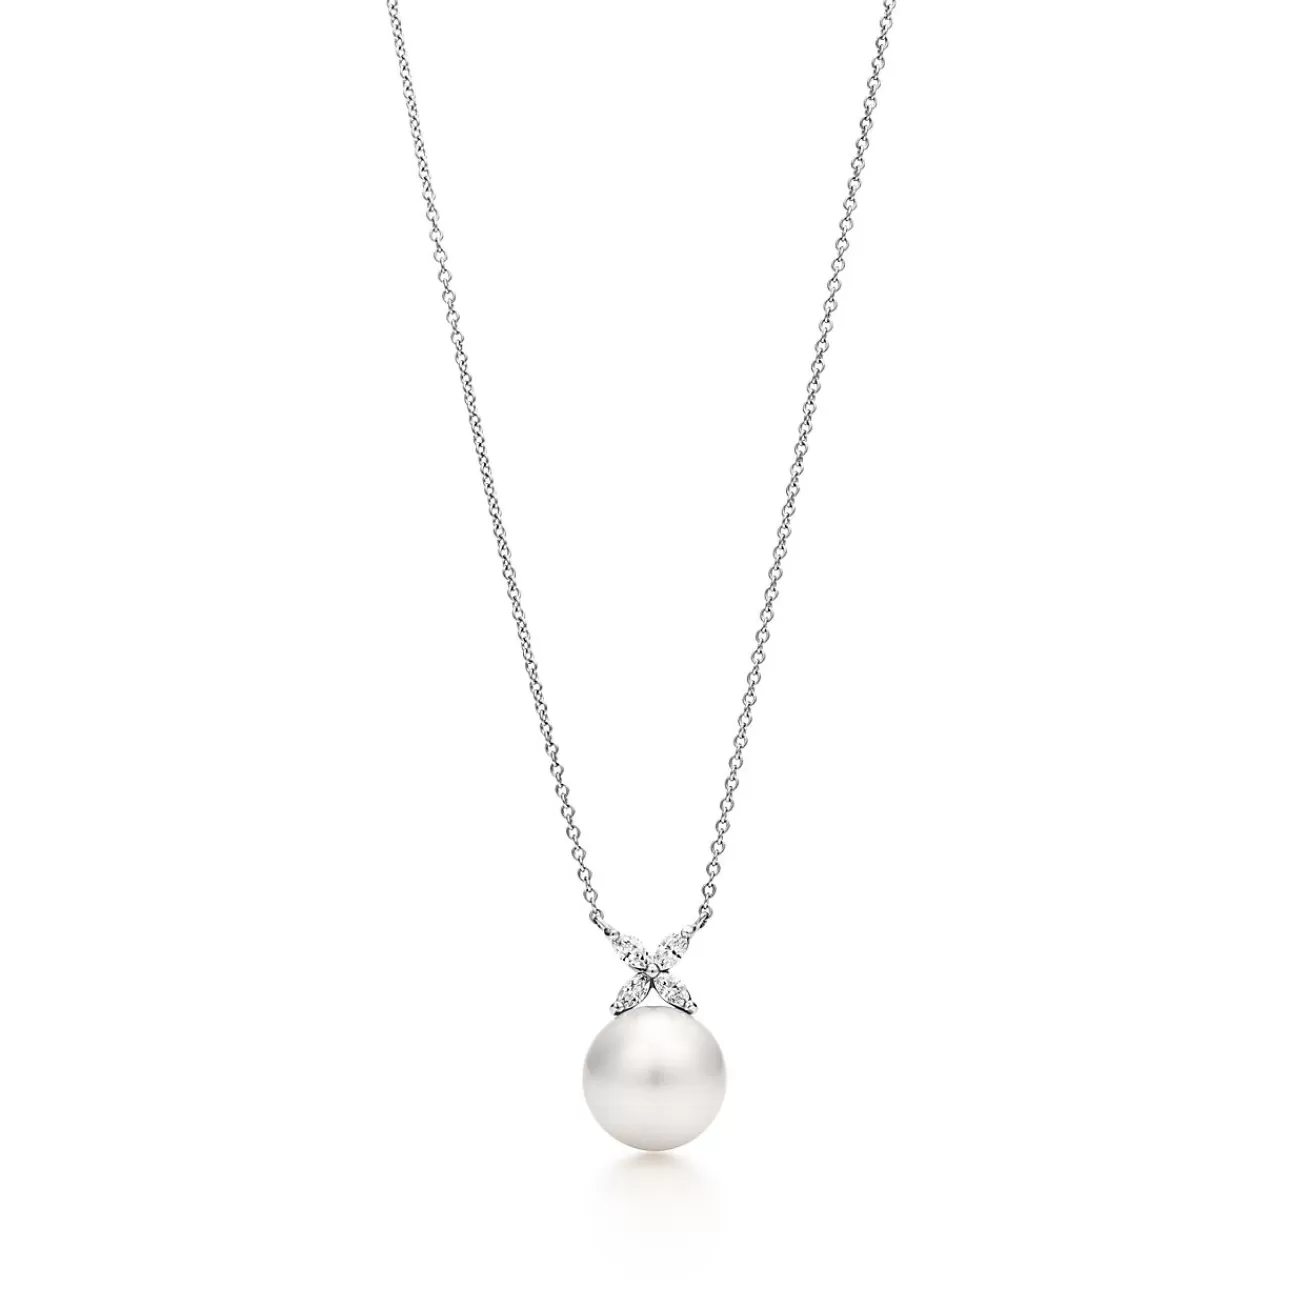 Tiffany & Co. Tiffany Victoria® pendant in platinum with a South Sea pearl and diamonds. | ^ Necklaces & Pendants | Gifts for Her